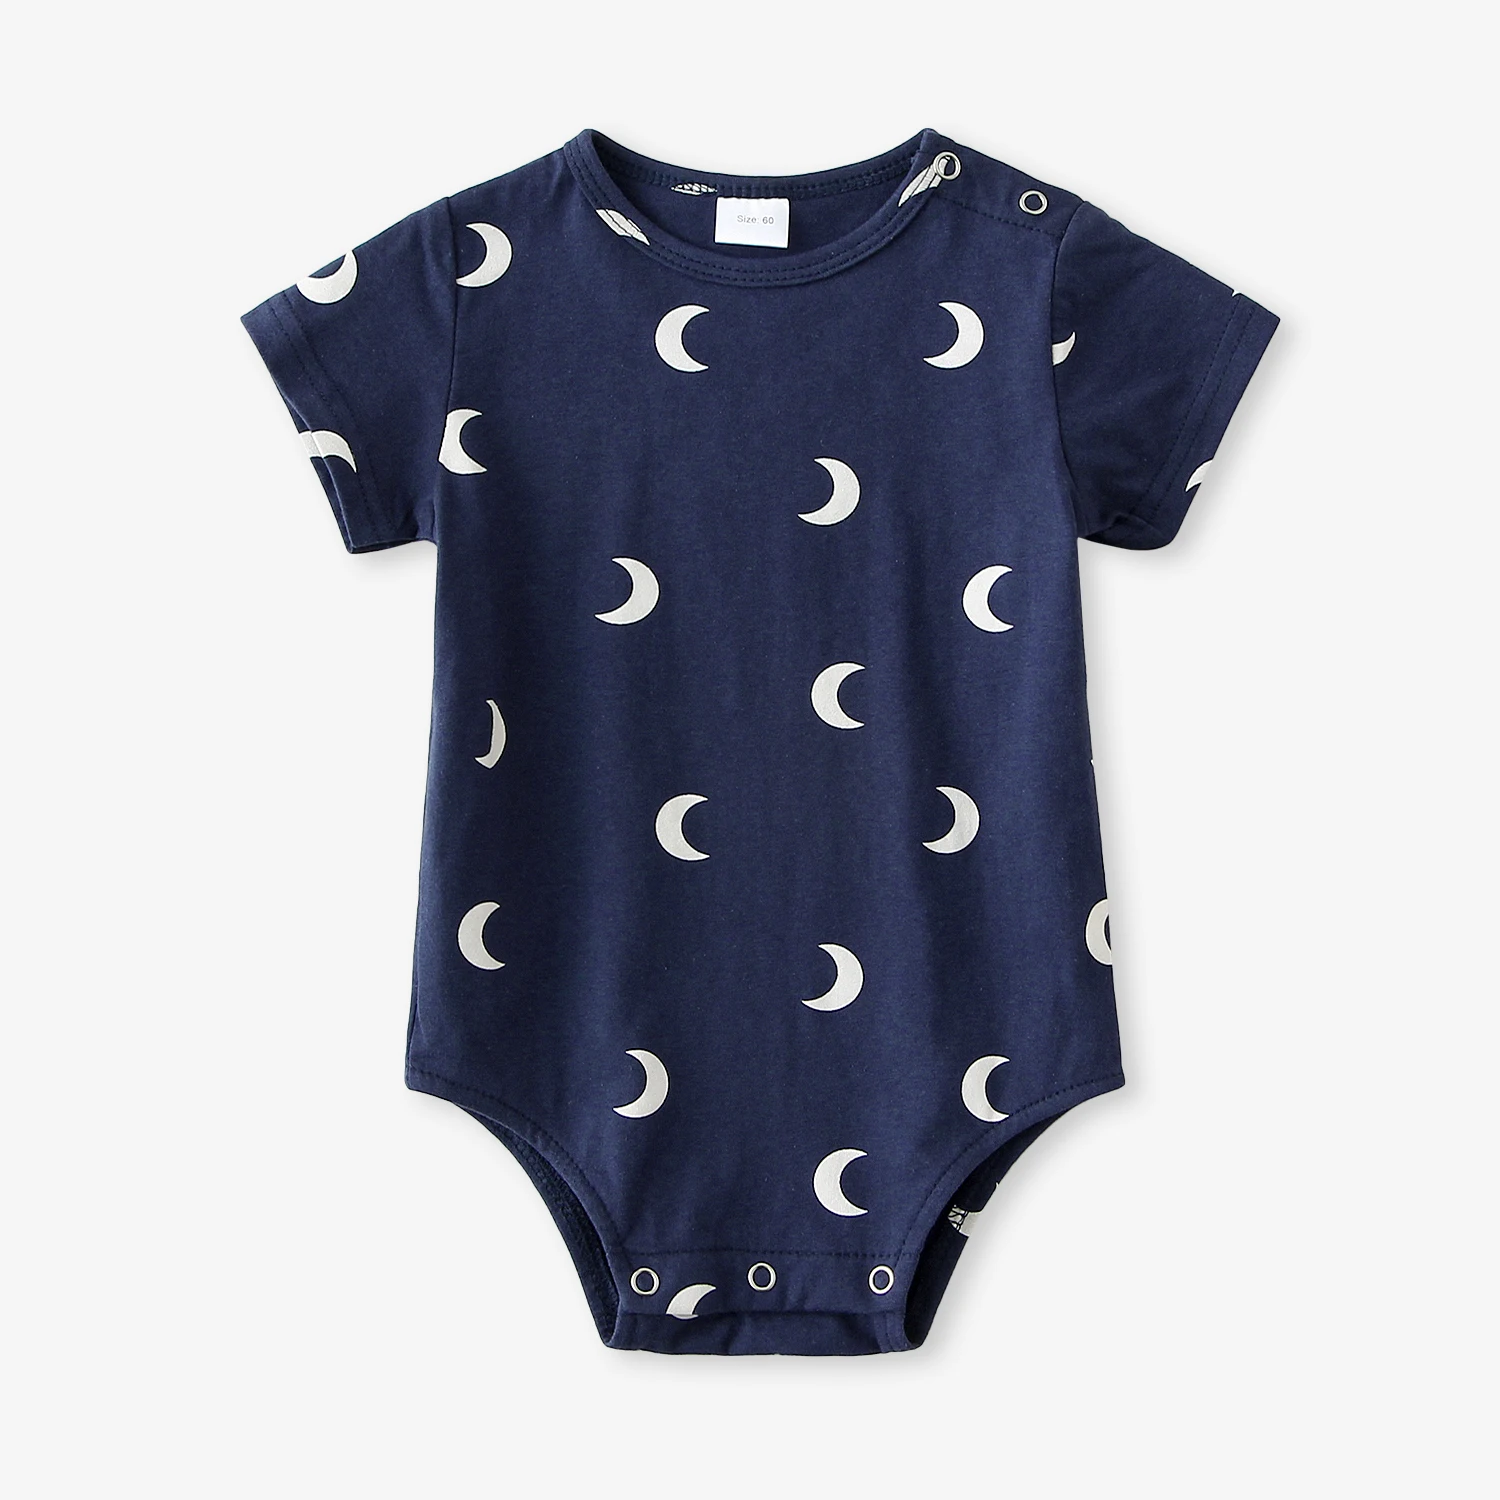 Infant Baby Boy Girl Romper Spring Summer Newborn Button Jumpsuit Printed Casual Long Sleeve Baby Boy Outfits Clothes Autumn baby clothes cheap Baby Rompers